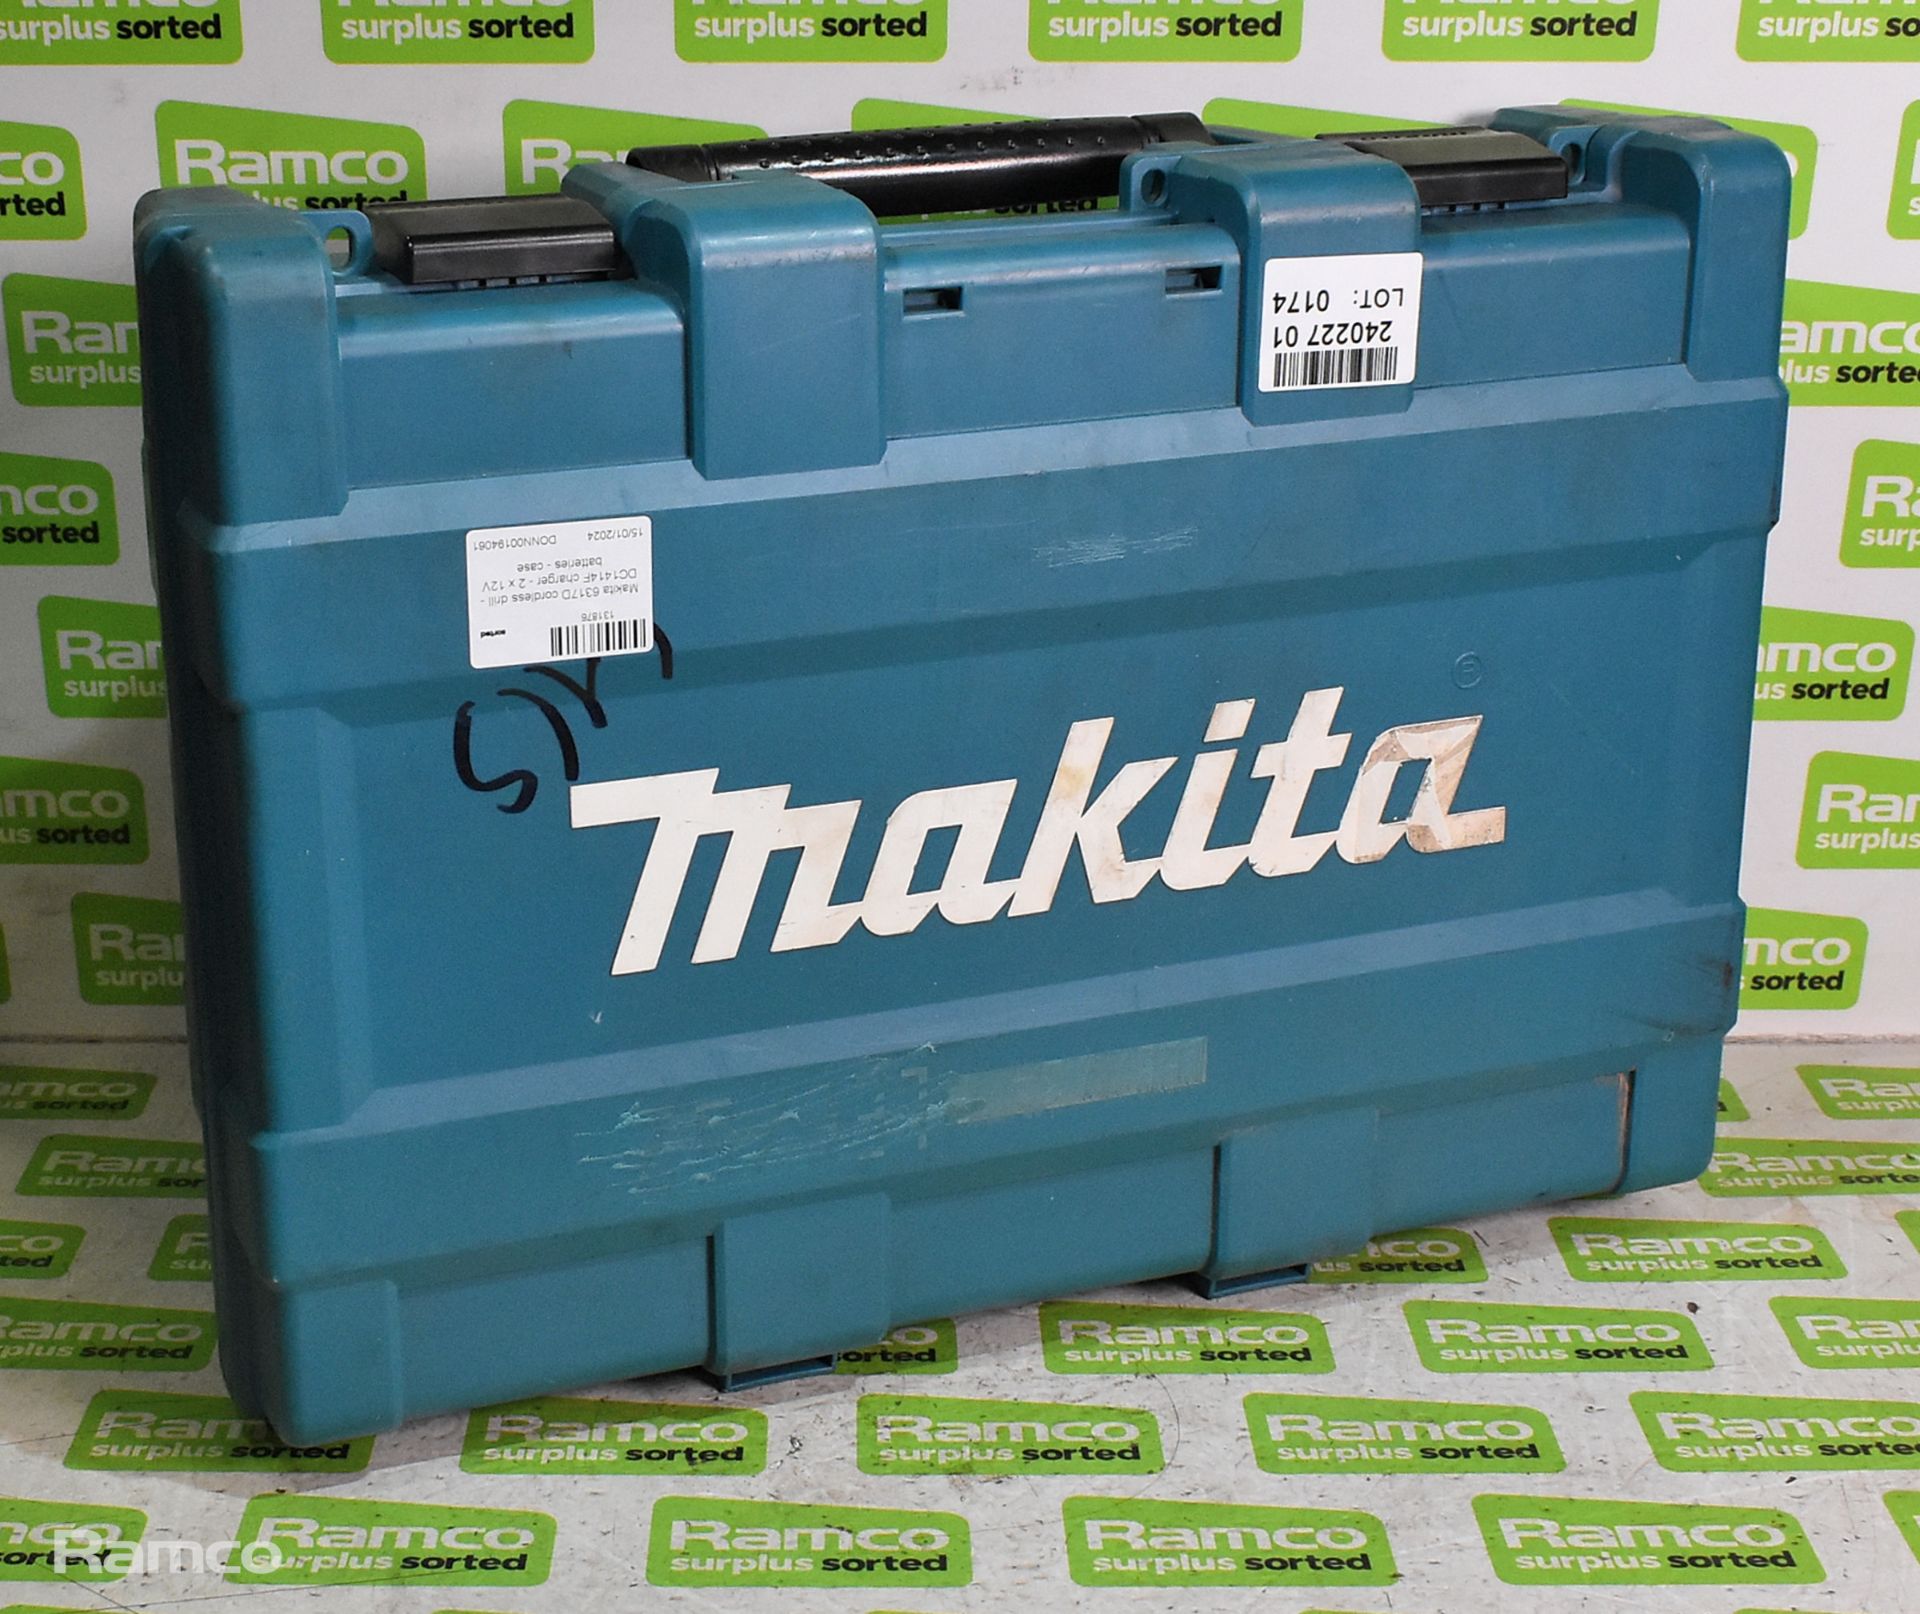 Makita 6317D cordless drill - DC1414F charger - 2 x 12V batteries - case - Image 7 of 7